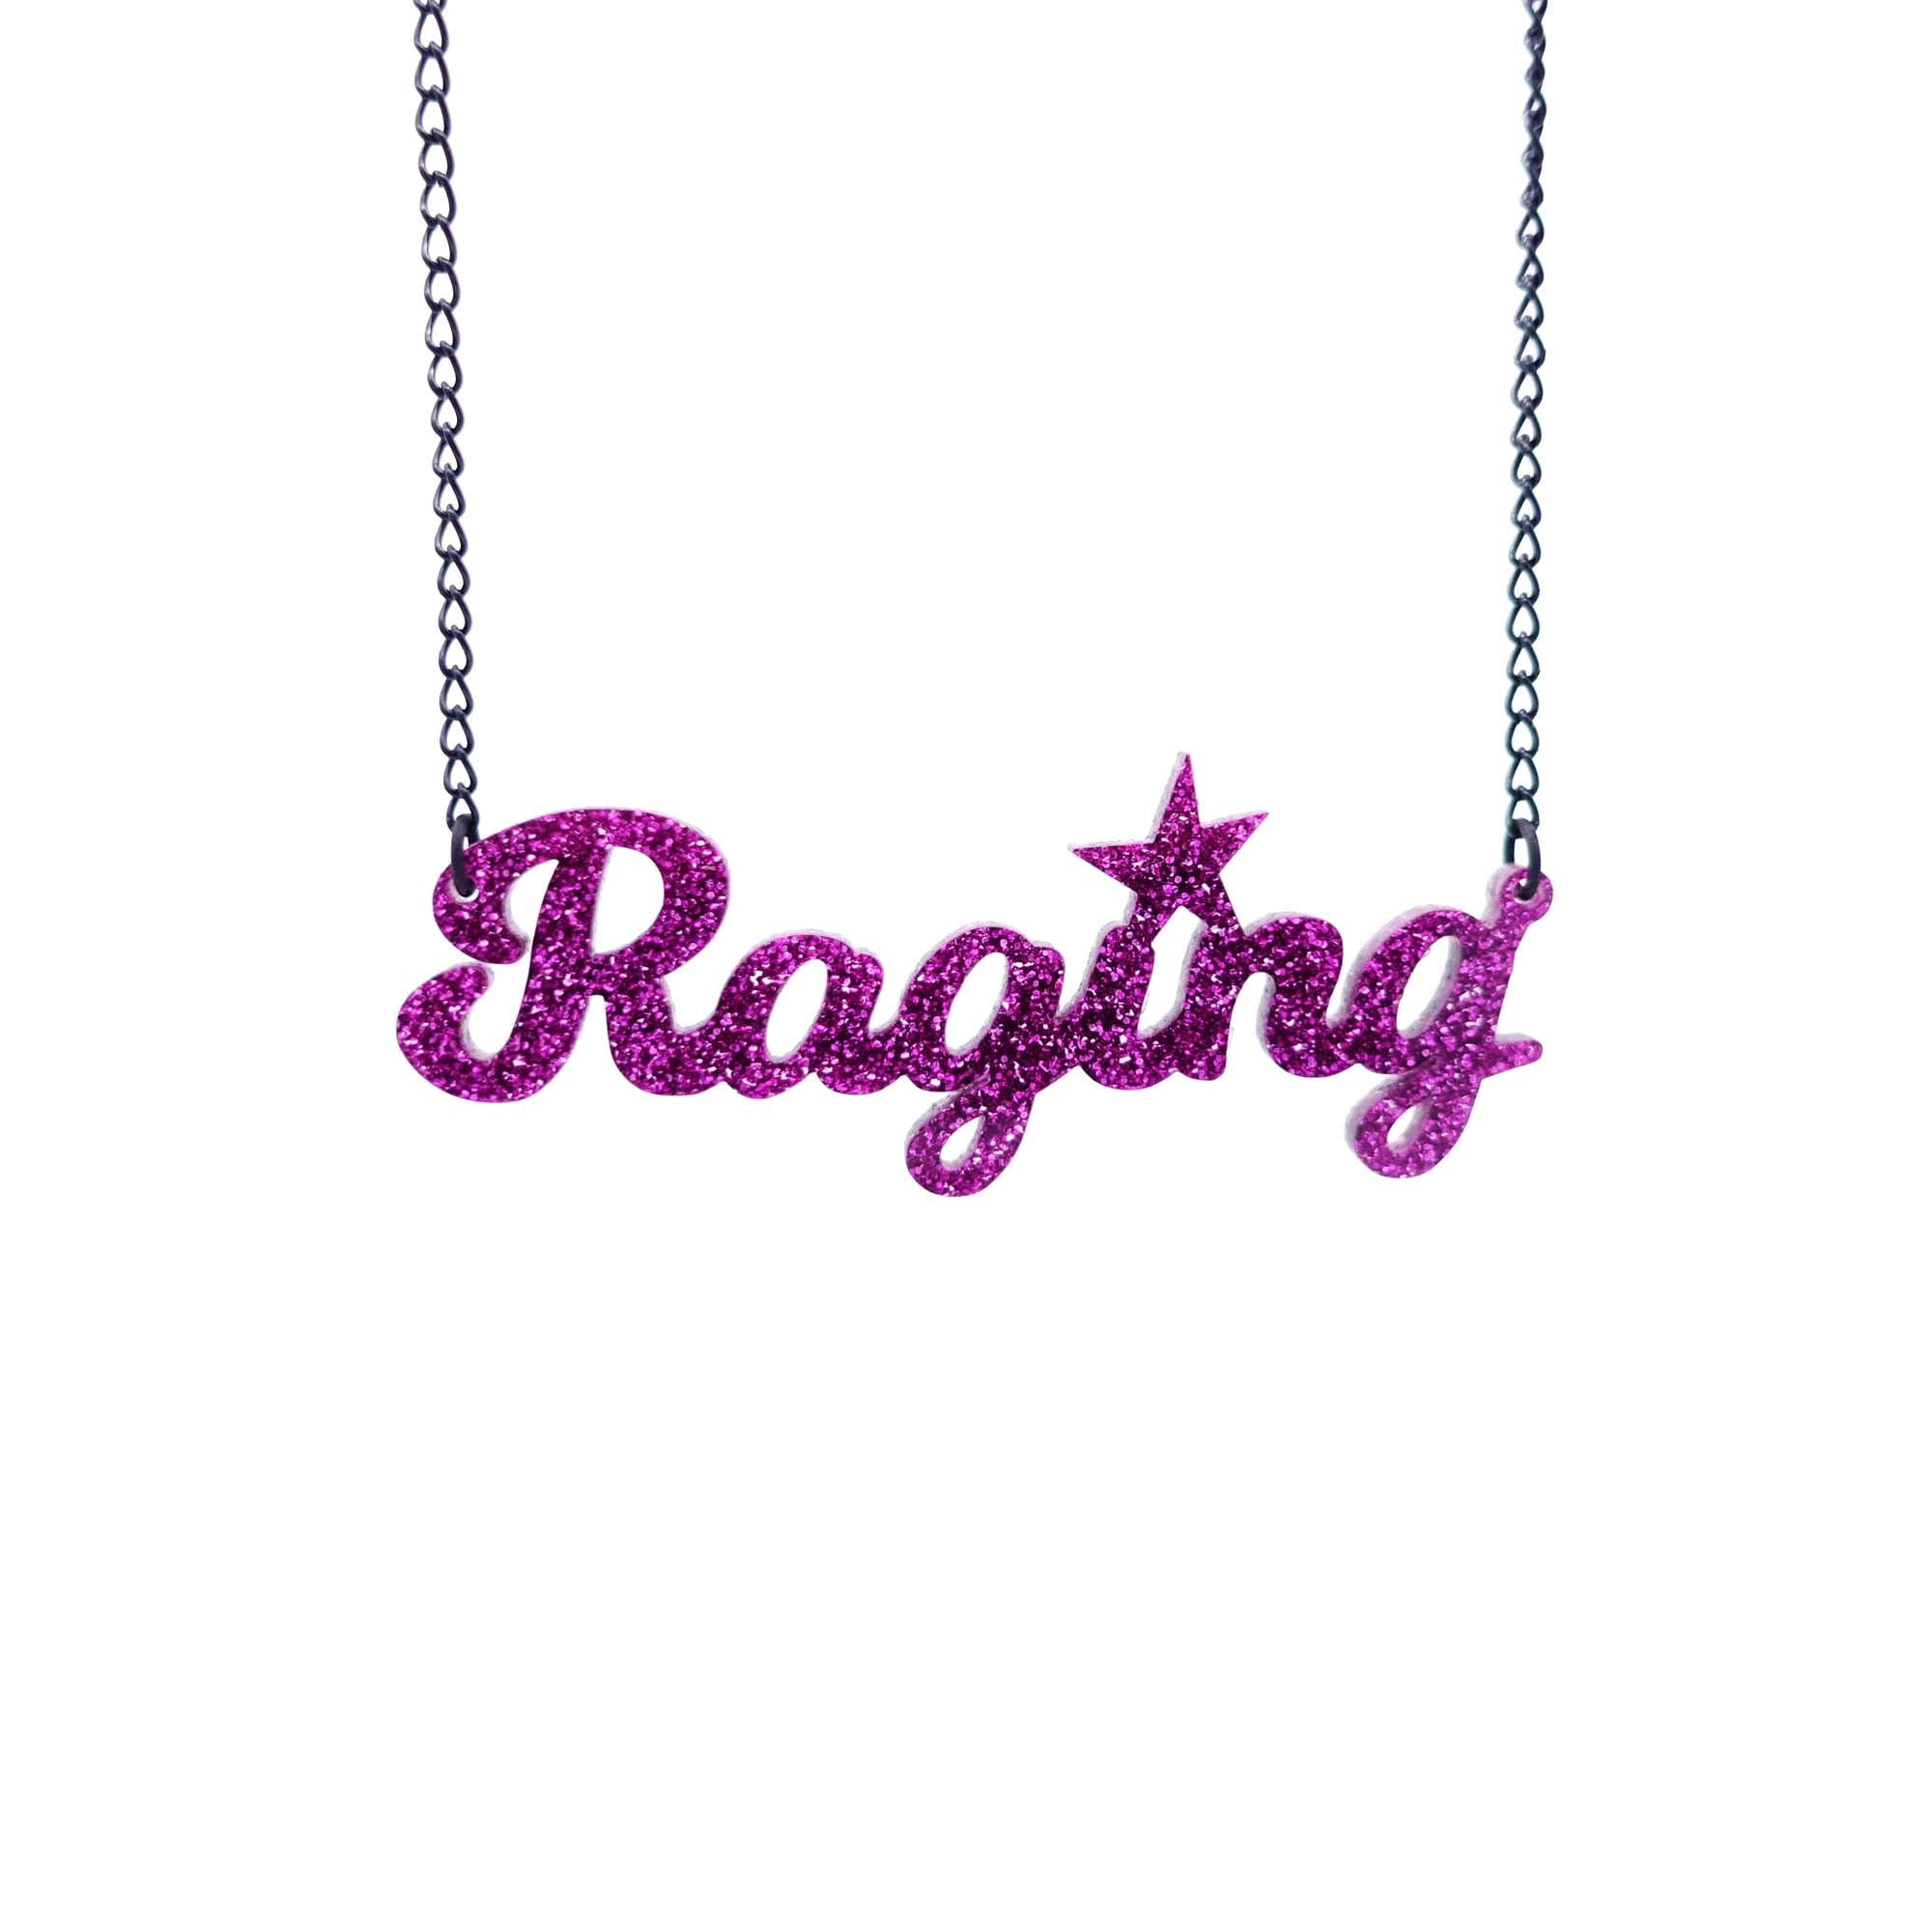 Purple glitter Raging necklace, express your rage in style! shown on white background. Designed by Sarah Day for Wear and Resist. £2 goes to Abortion Support Network. 